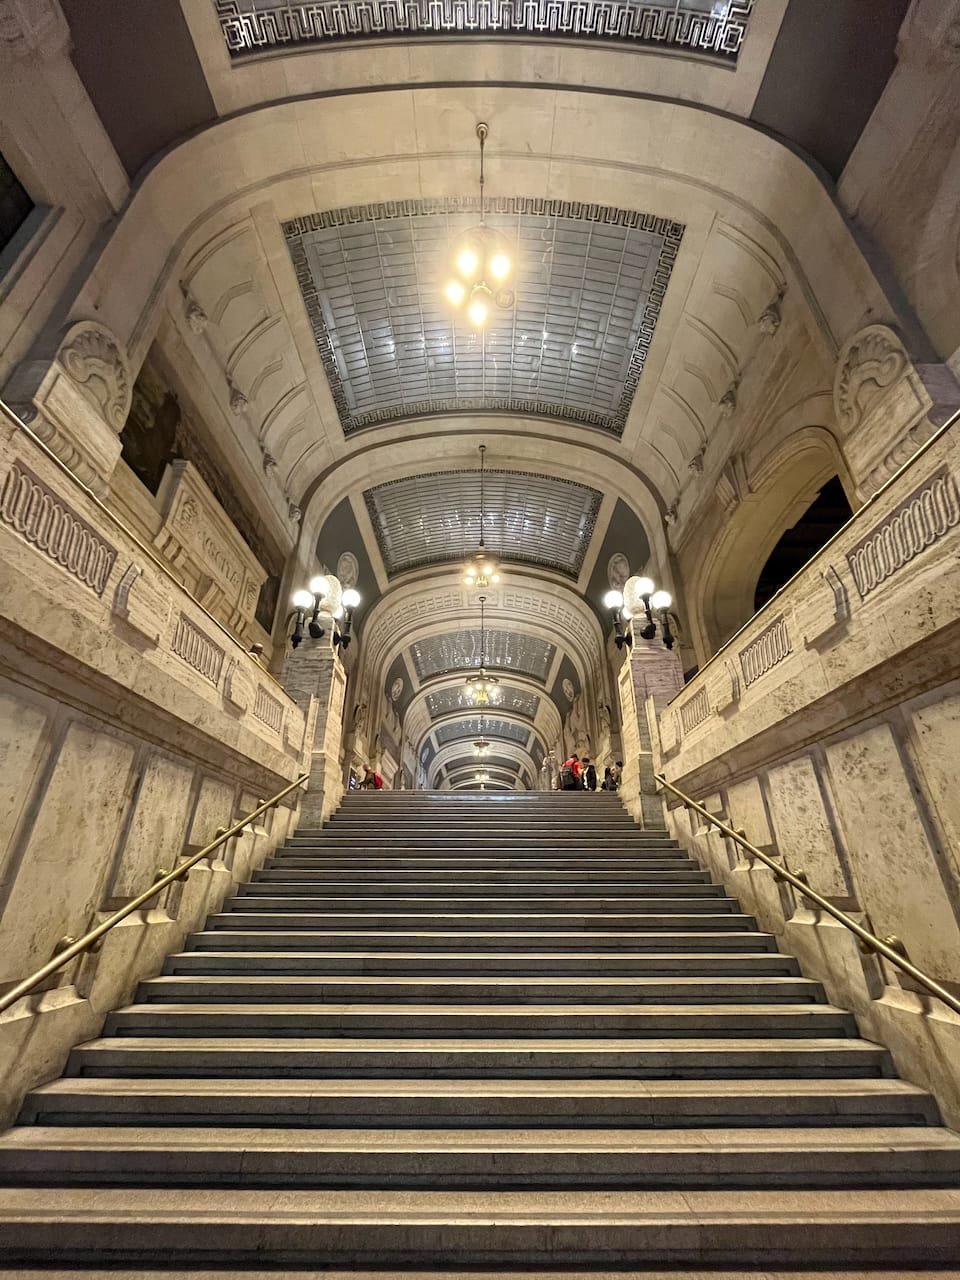 A vertical shot of a stairwell from the bottom. Everything is white marble. Golden handrails. At the top of the stairs just the roof is visible: tall arches with glass portions and hanging chandeliers.